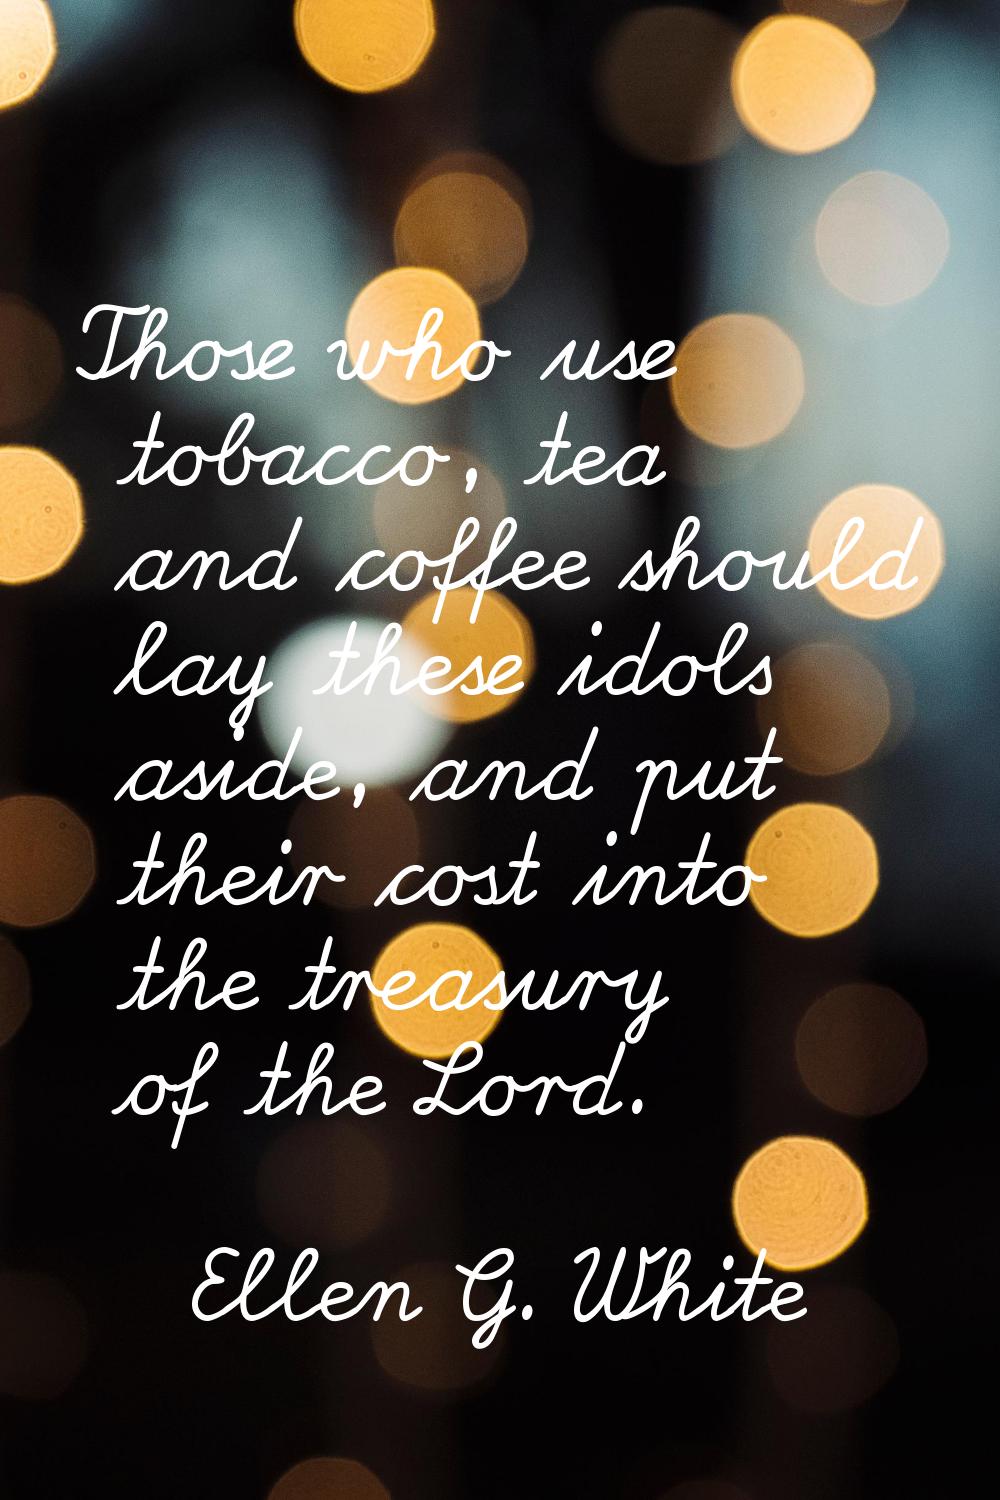 Those who use tobacco, tea and coffee should lay these idols aside, and put their cost into the tre